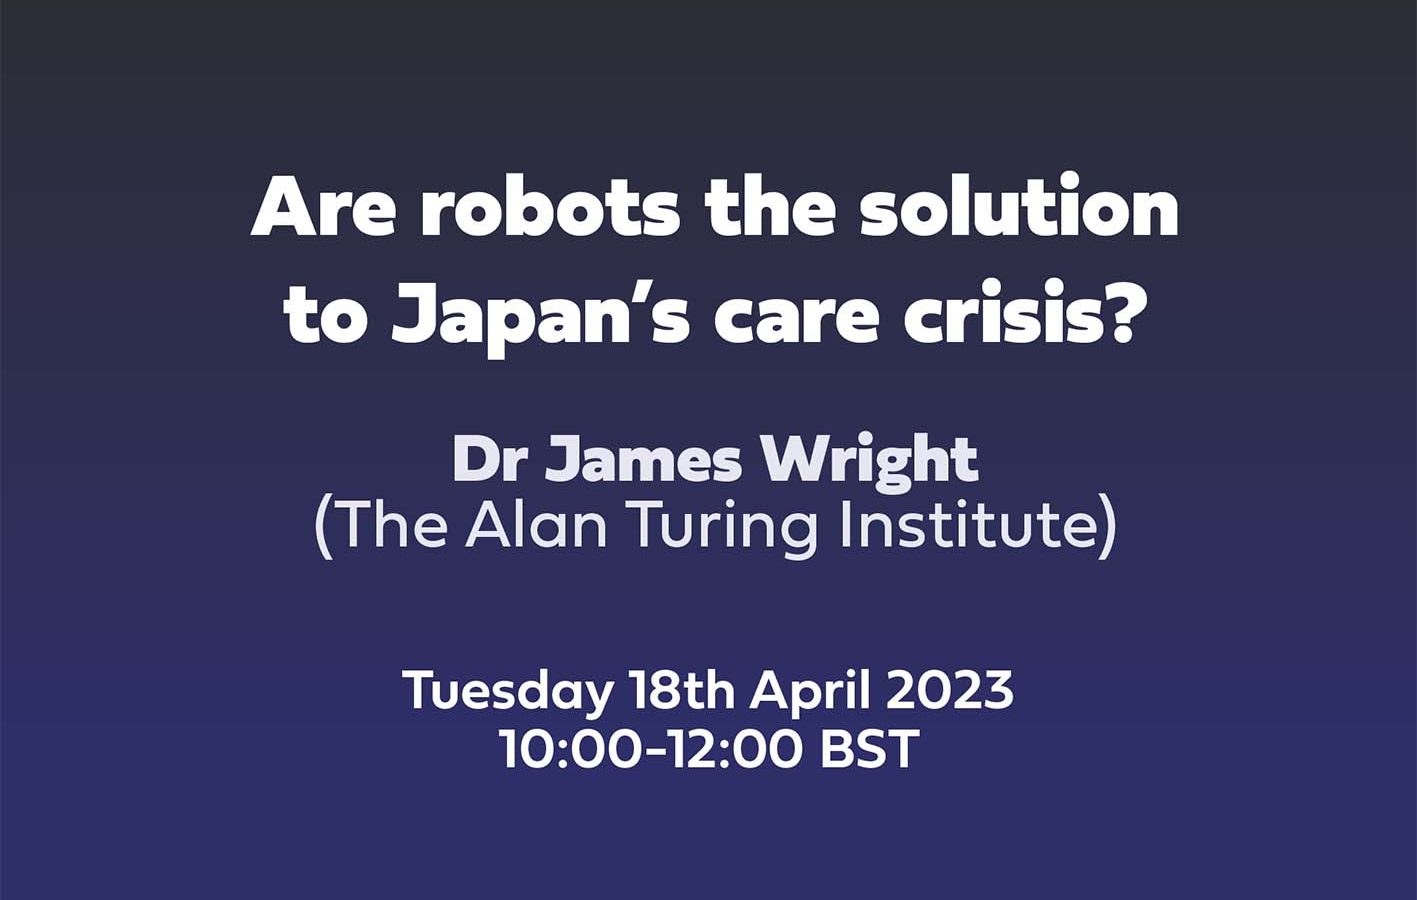 Text: Are robots the solution to Japan’s care crisis? Dr James Wright, The Alan Turing Institute, Tuesday 18th April 2023 10:00-12:00 BST